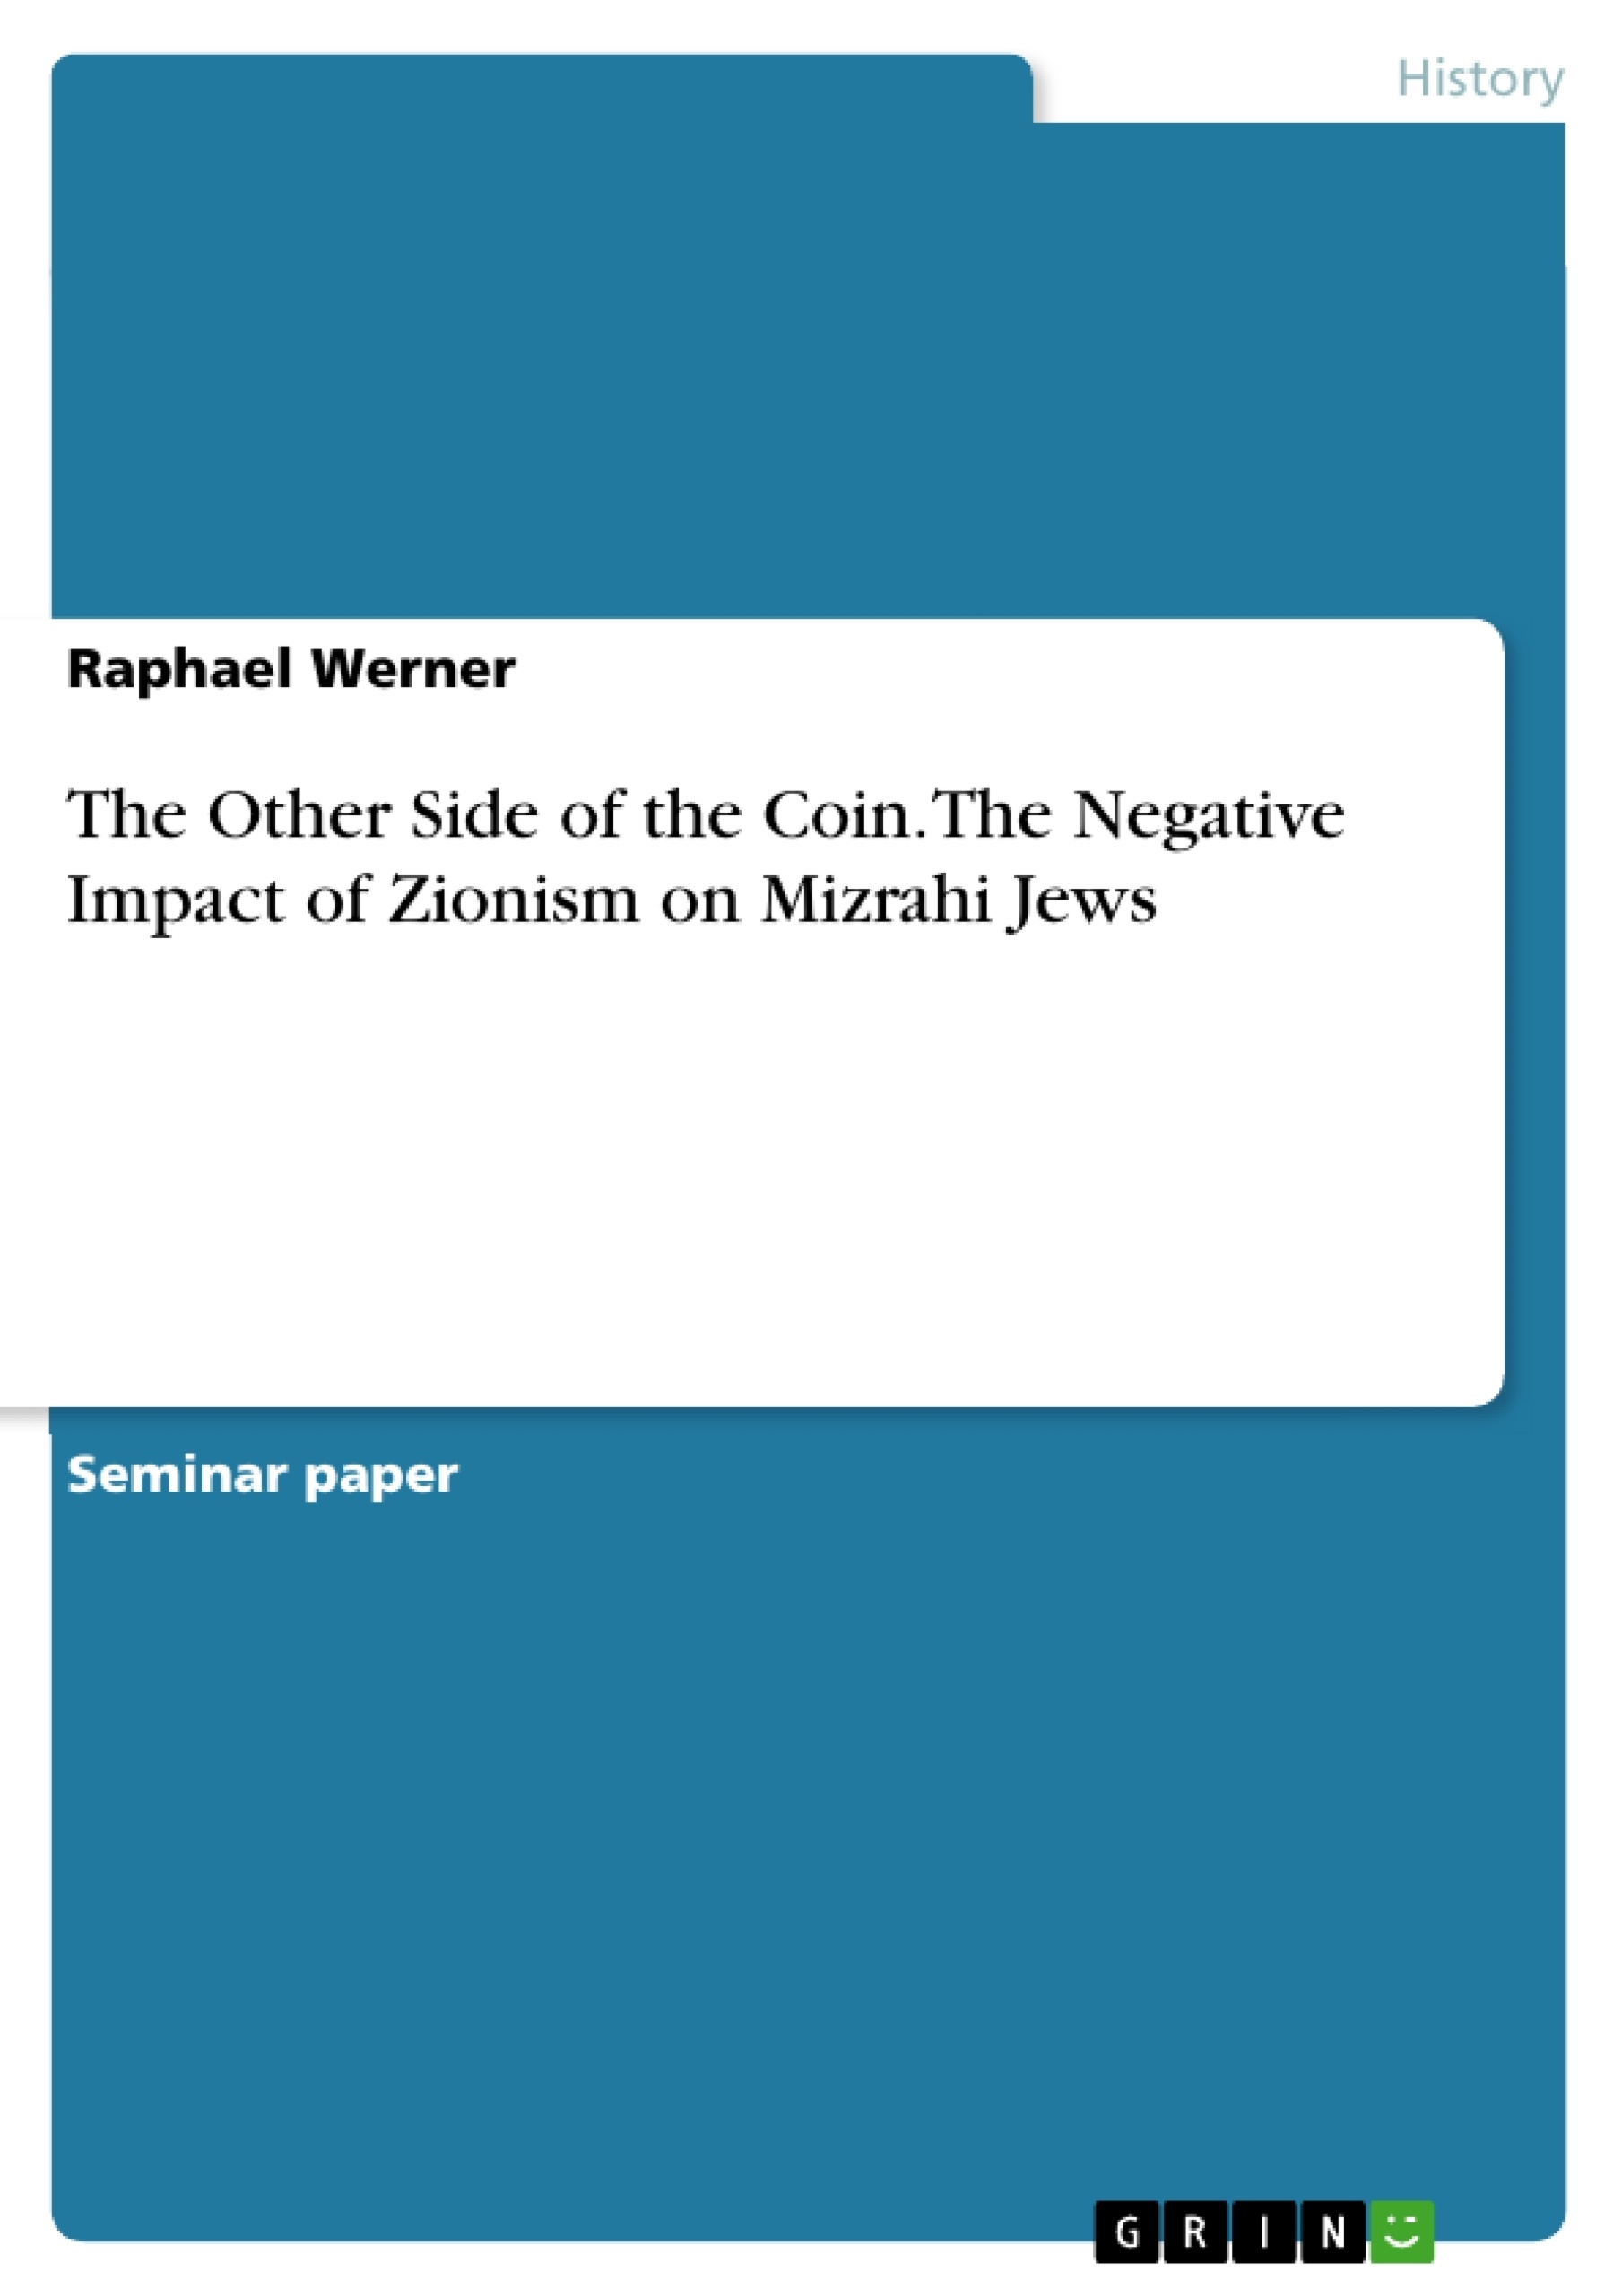 Titre: The Other Side of the Coin. The Negative Impact of Zionism on Mizrahi Jews